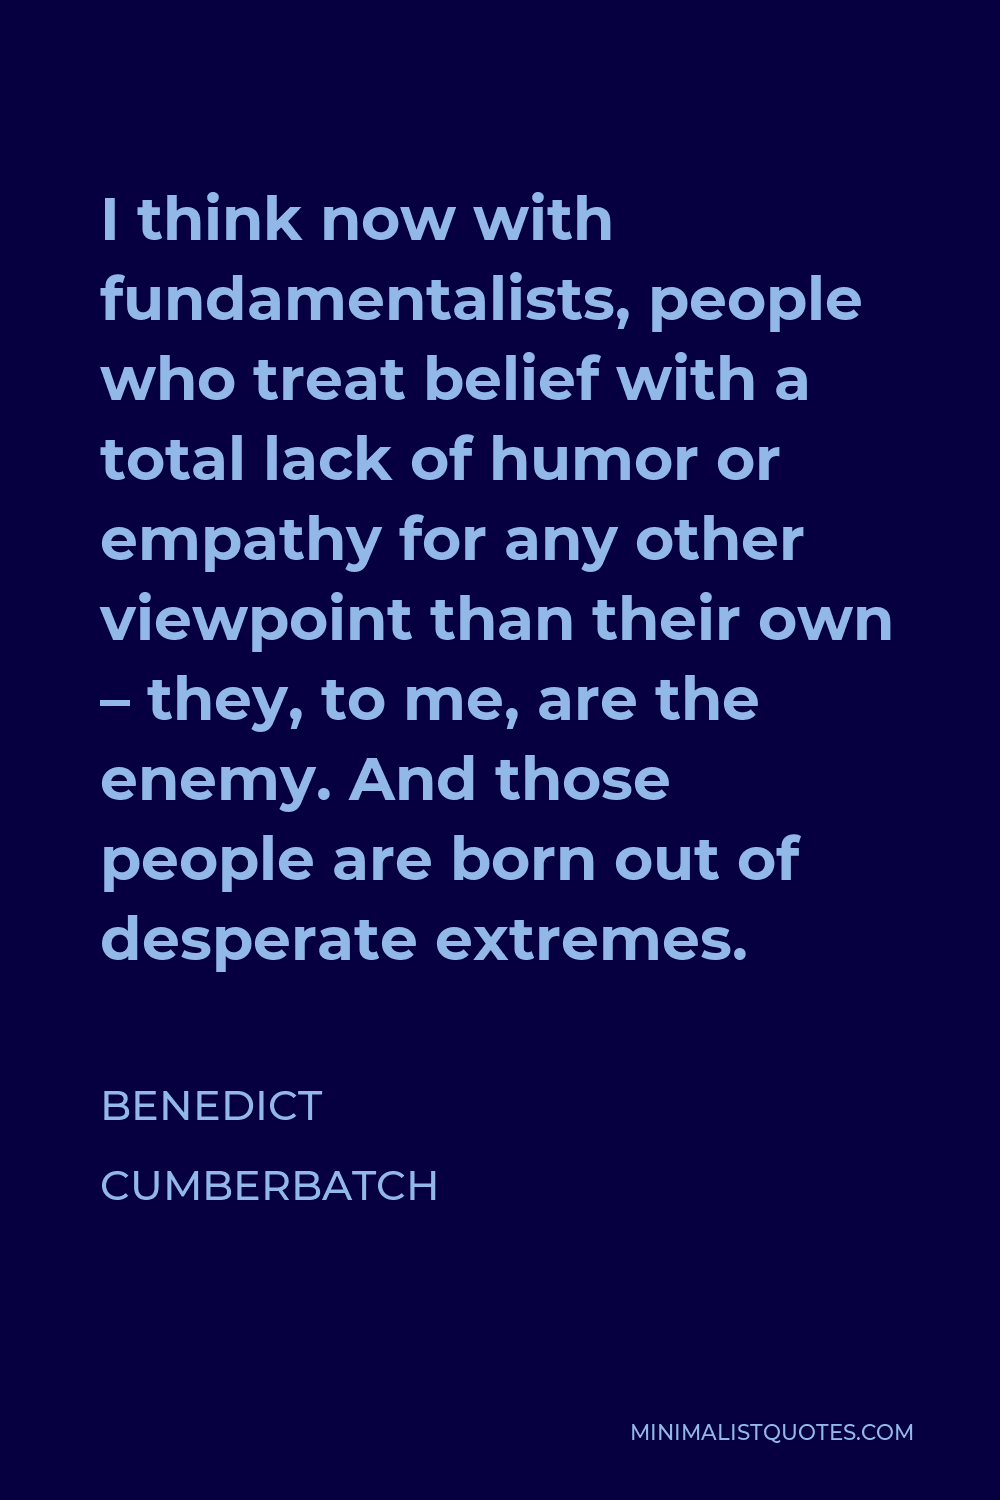 Benedict Cumberbatch Quote - I think now with fundamentalists, people who treat belief with a total lack of humor or empathy for any other viewpoint than their own – they, to me, are the enemy. And those people are born out of desperate extremes.